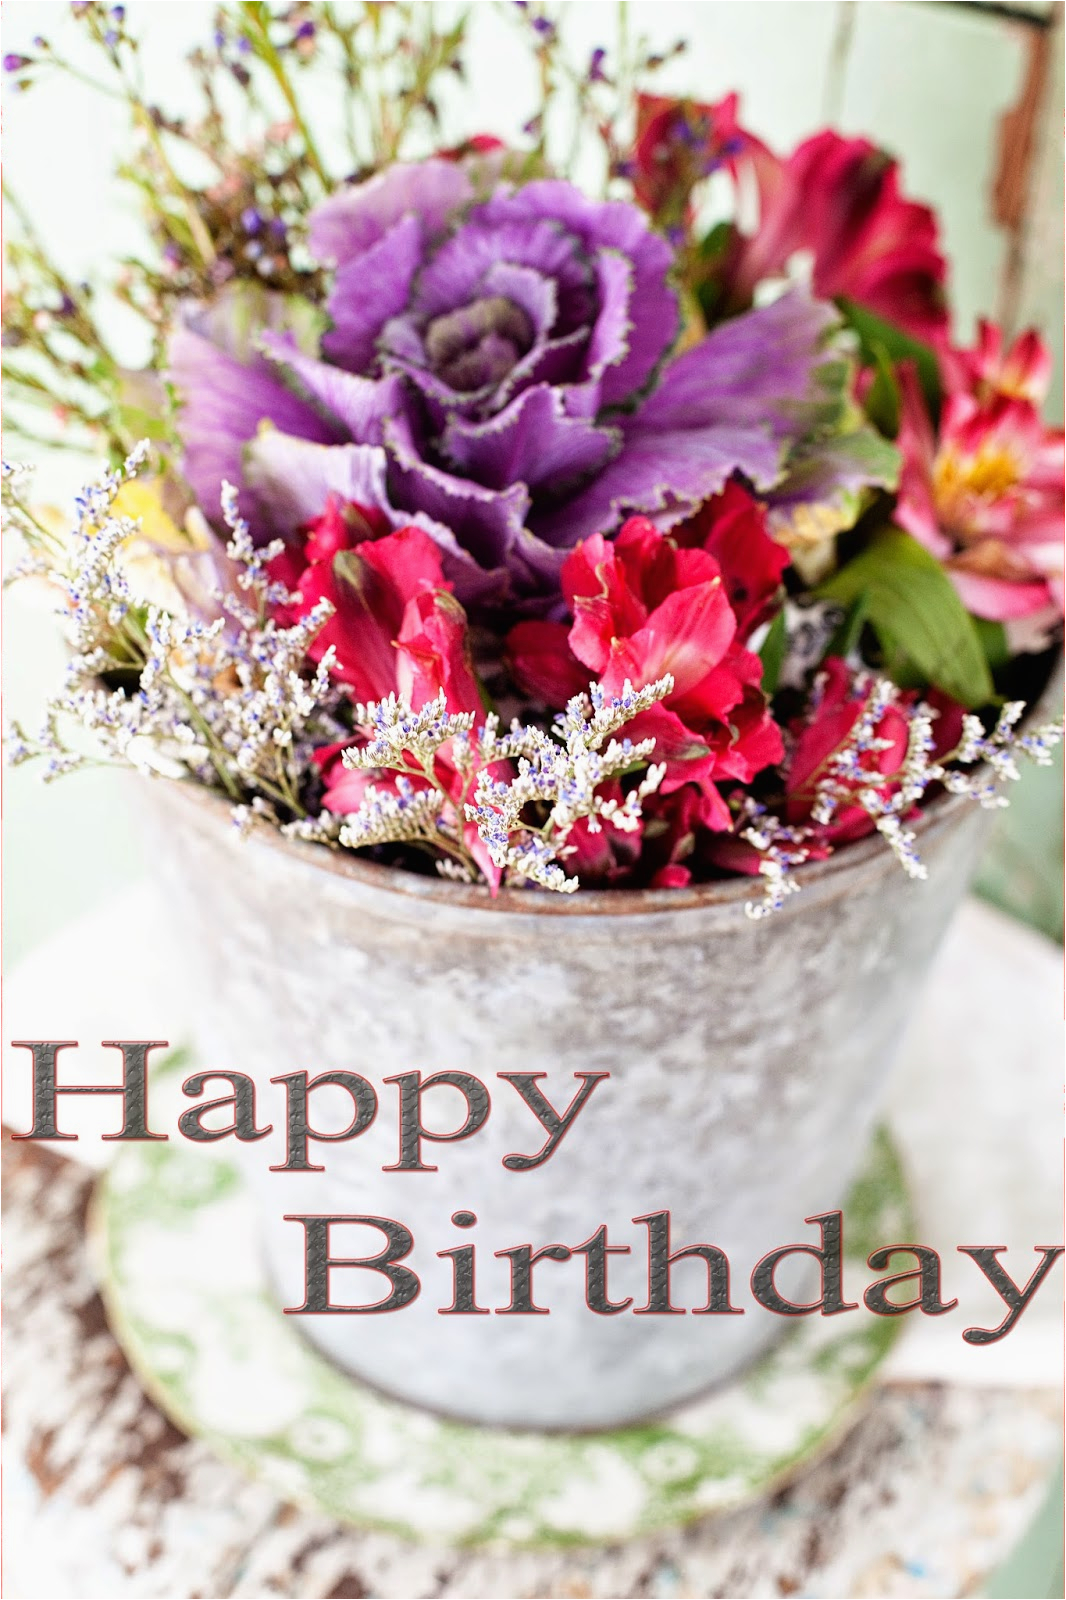 Happy birthday images for him - seriessalo